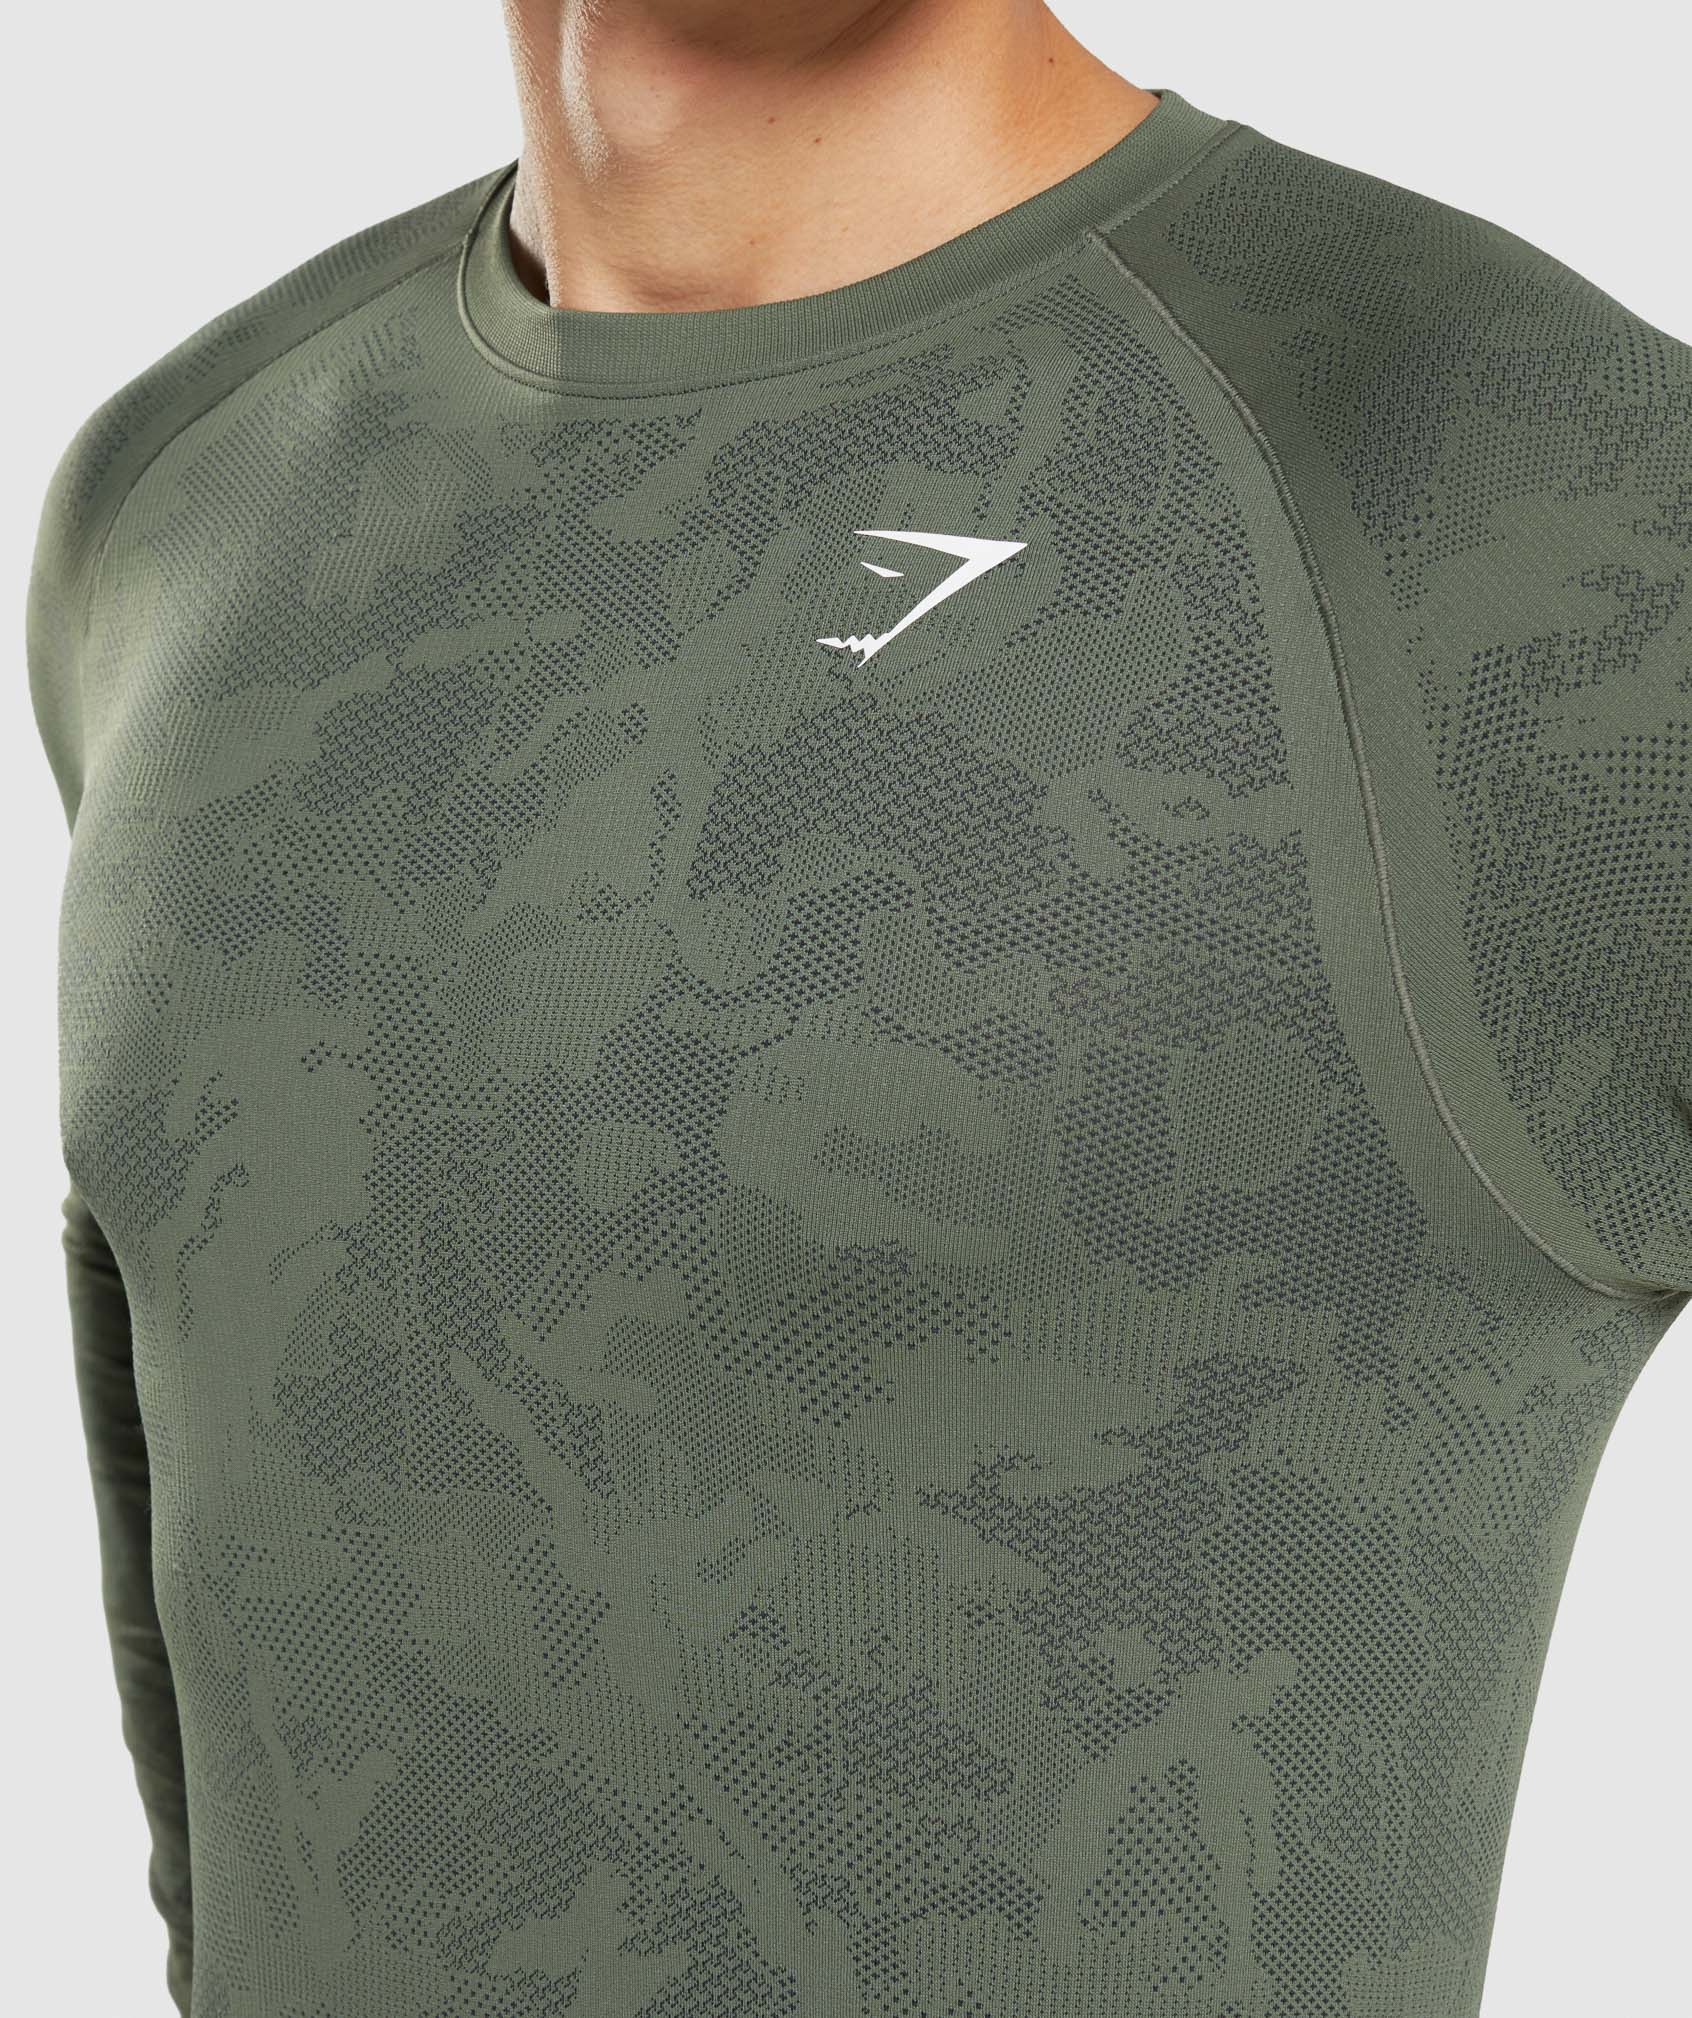 Geo Seamless Long Sleeve T-Shirt in Core Olive/Black - view 5